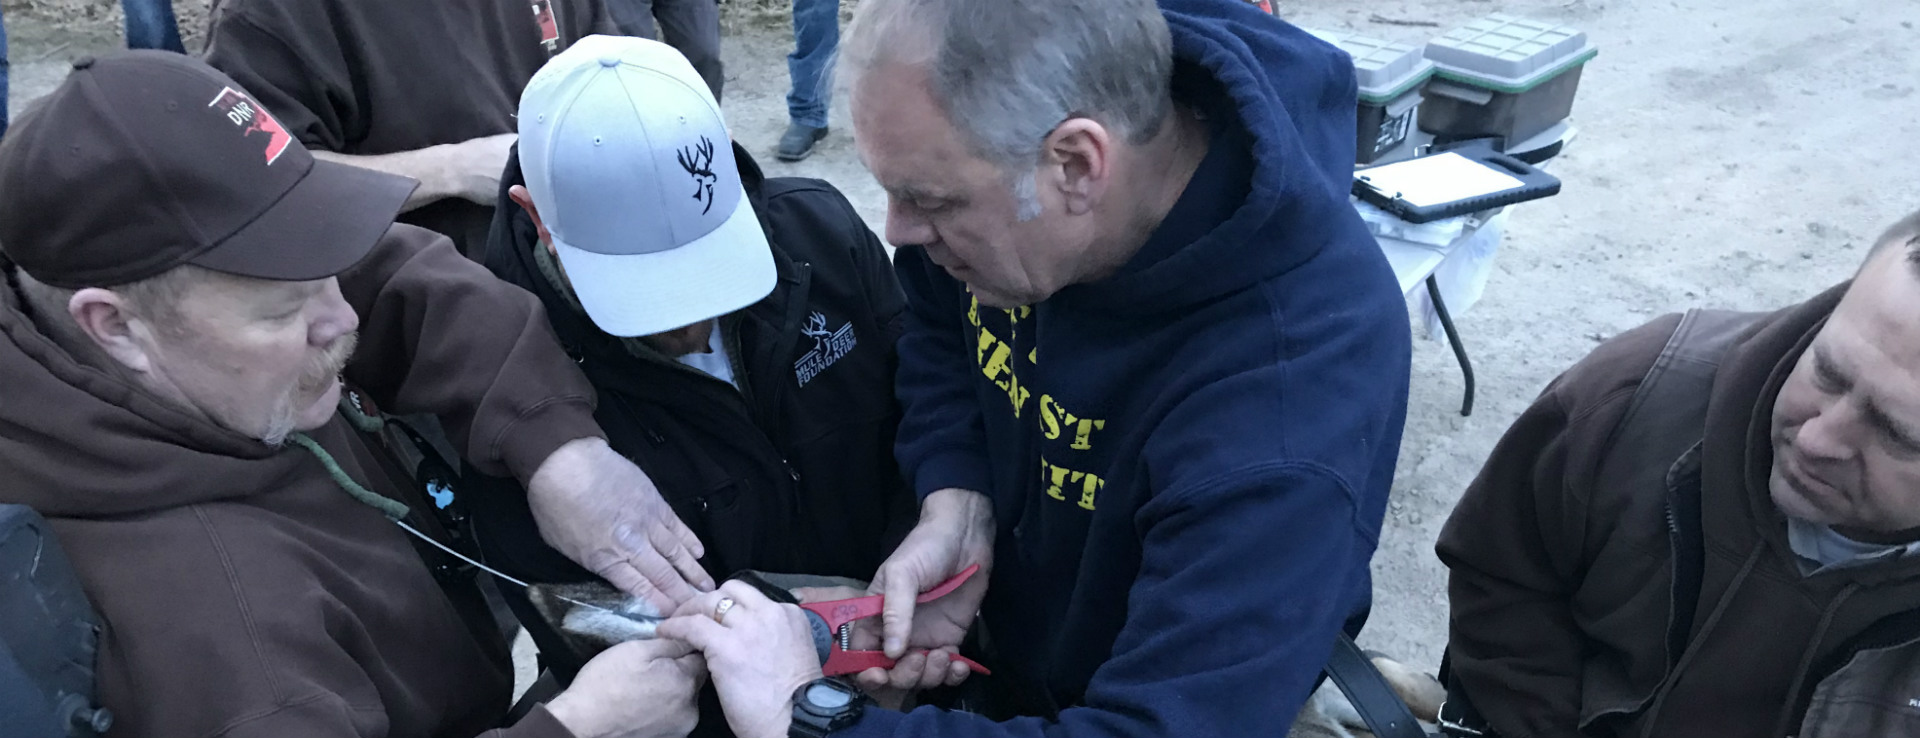 Secretary Zinke and two other white men in outdoor gear use pliers to attach a tag to the ear of a sedated mule deer.